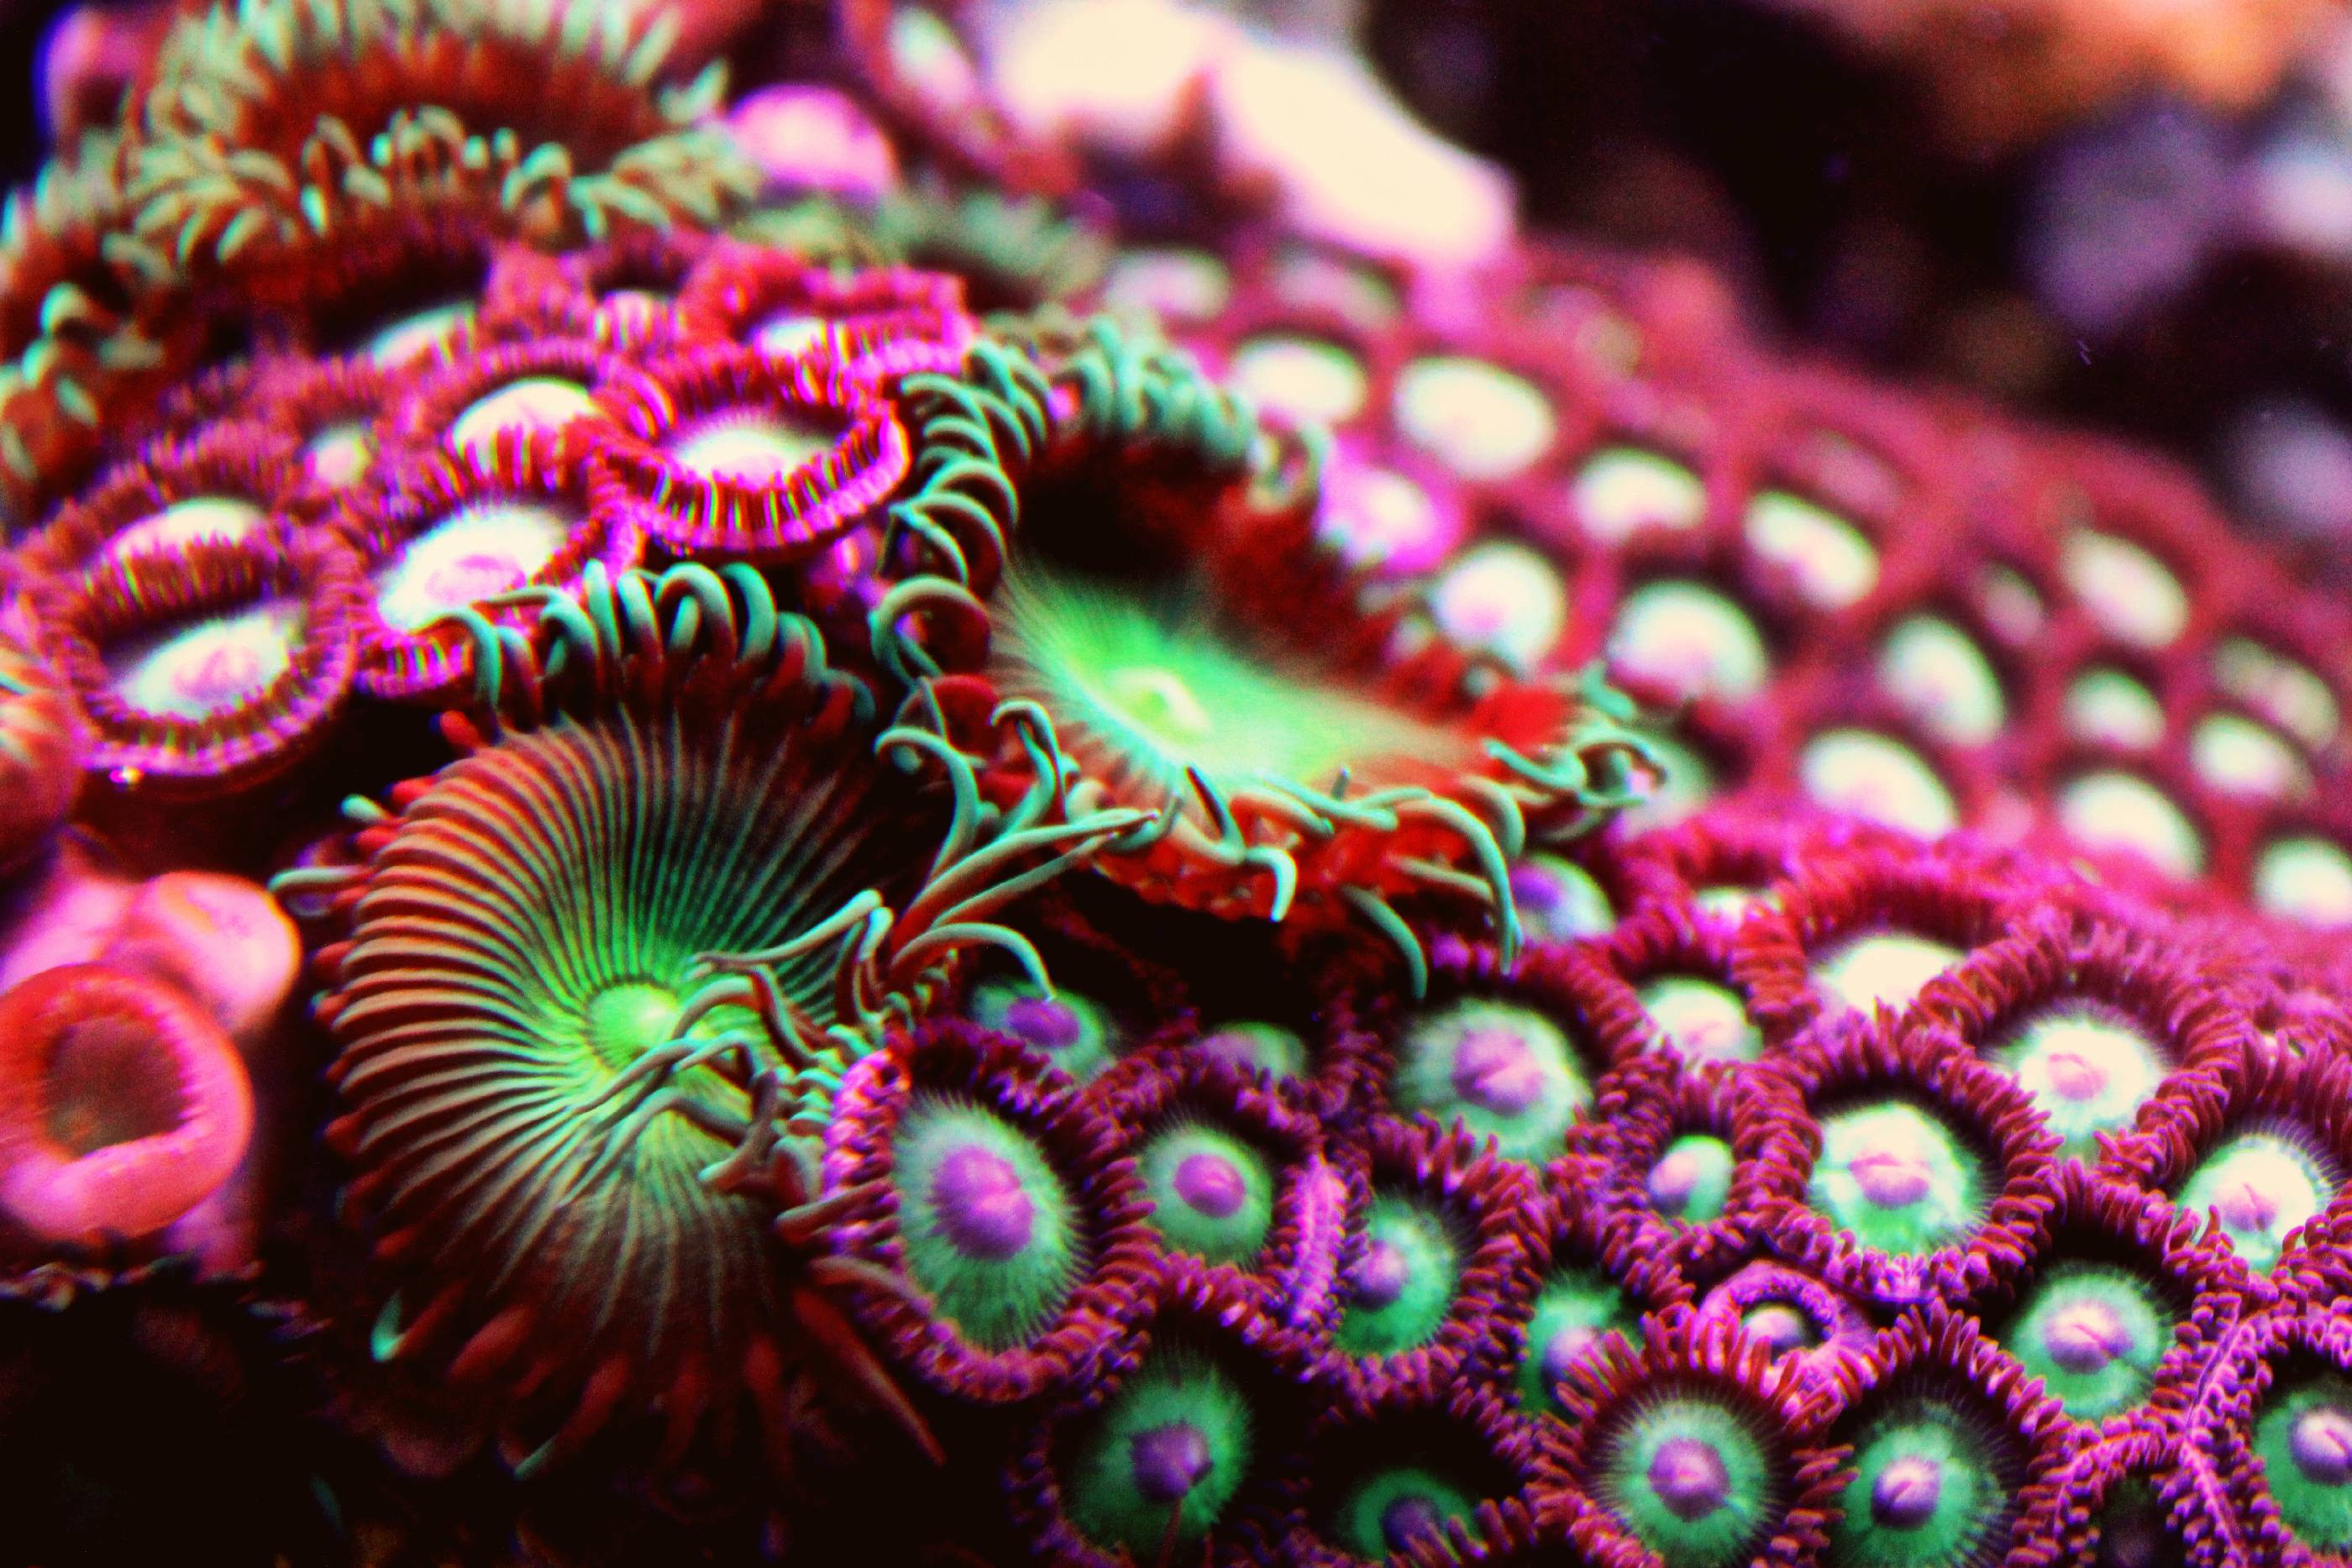 Purple Beauty This coral is a beautiful coral and green